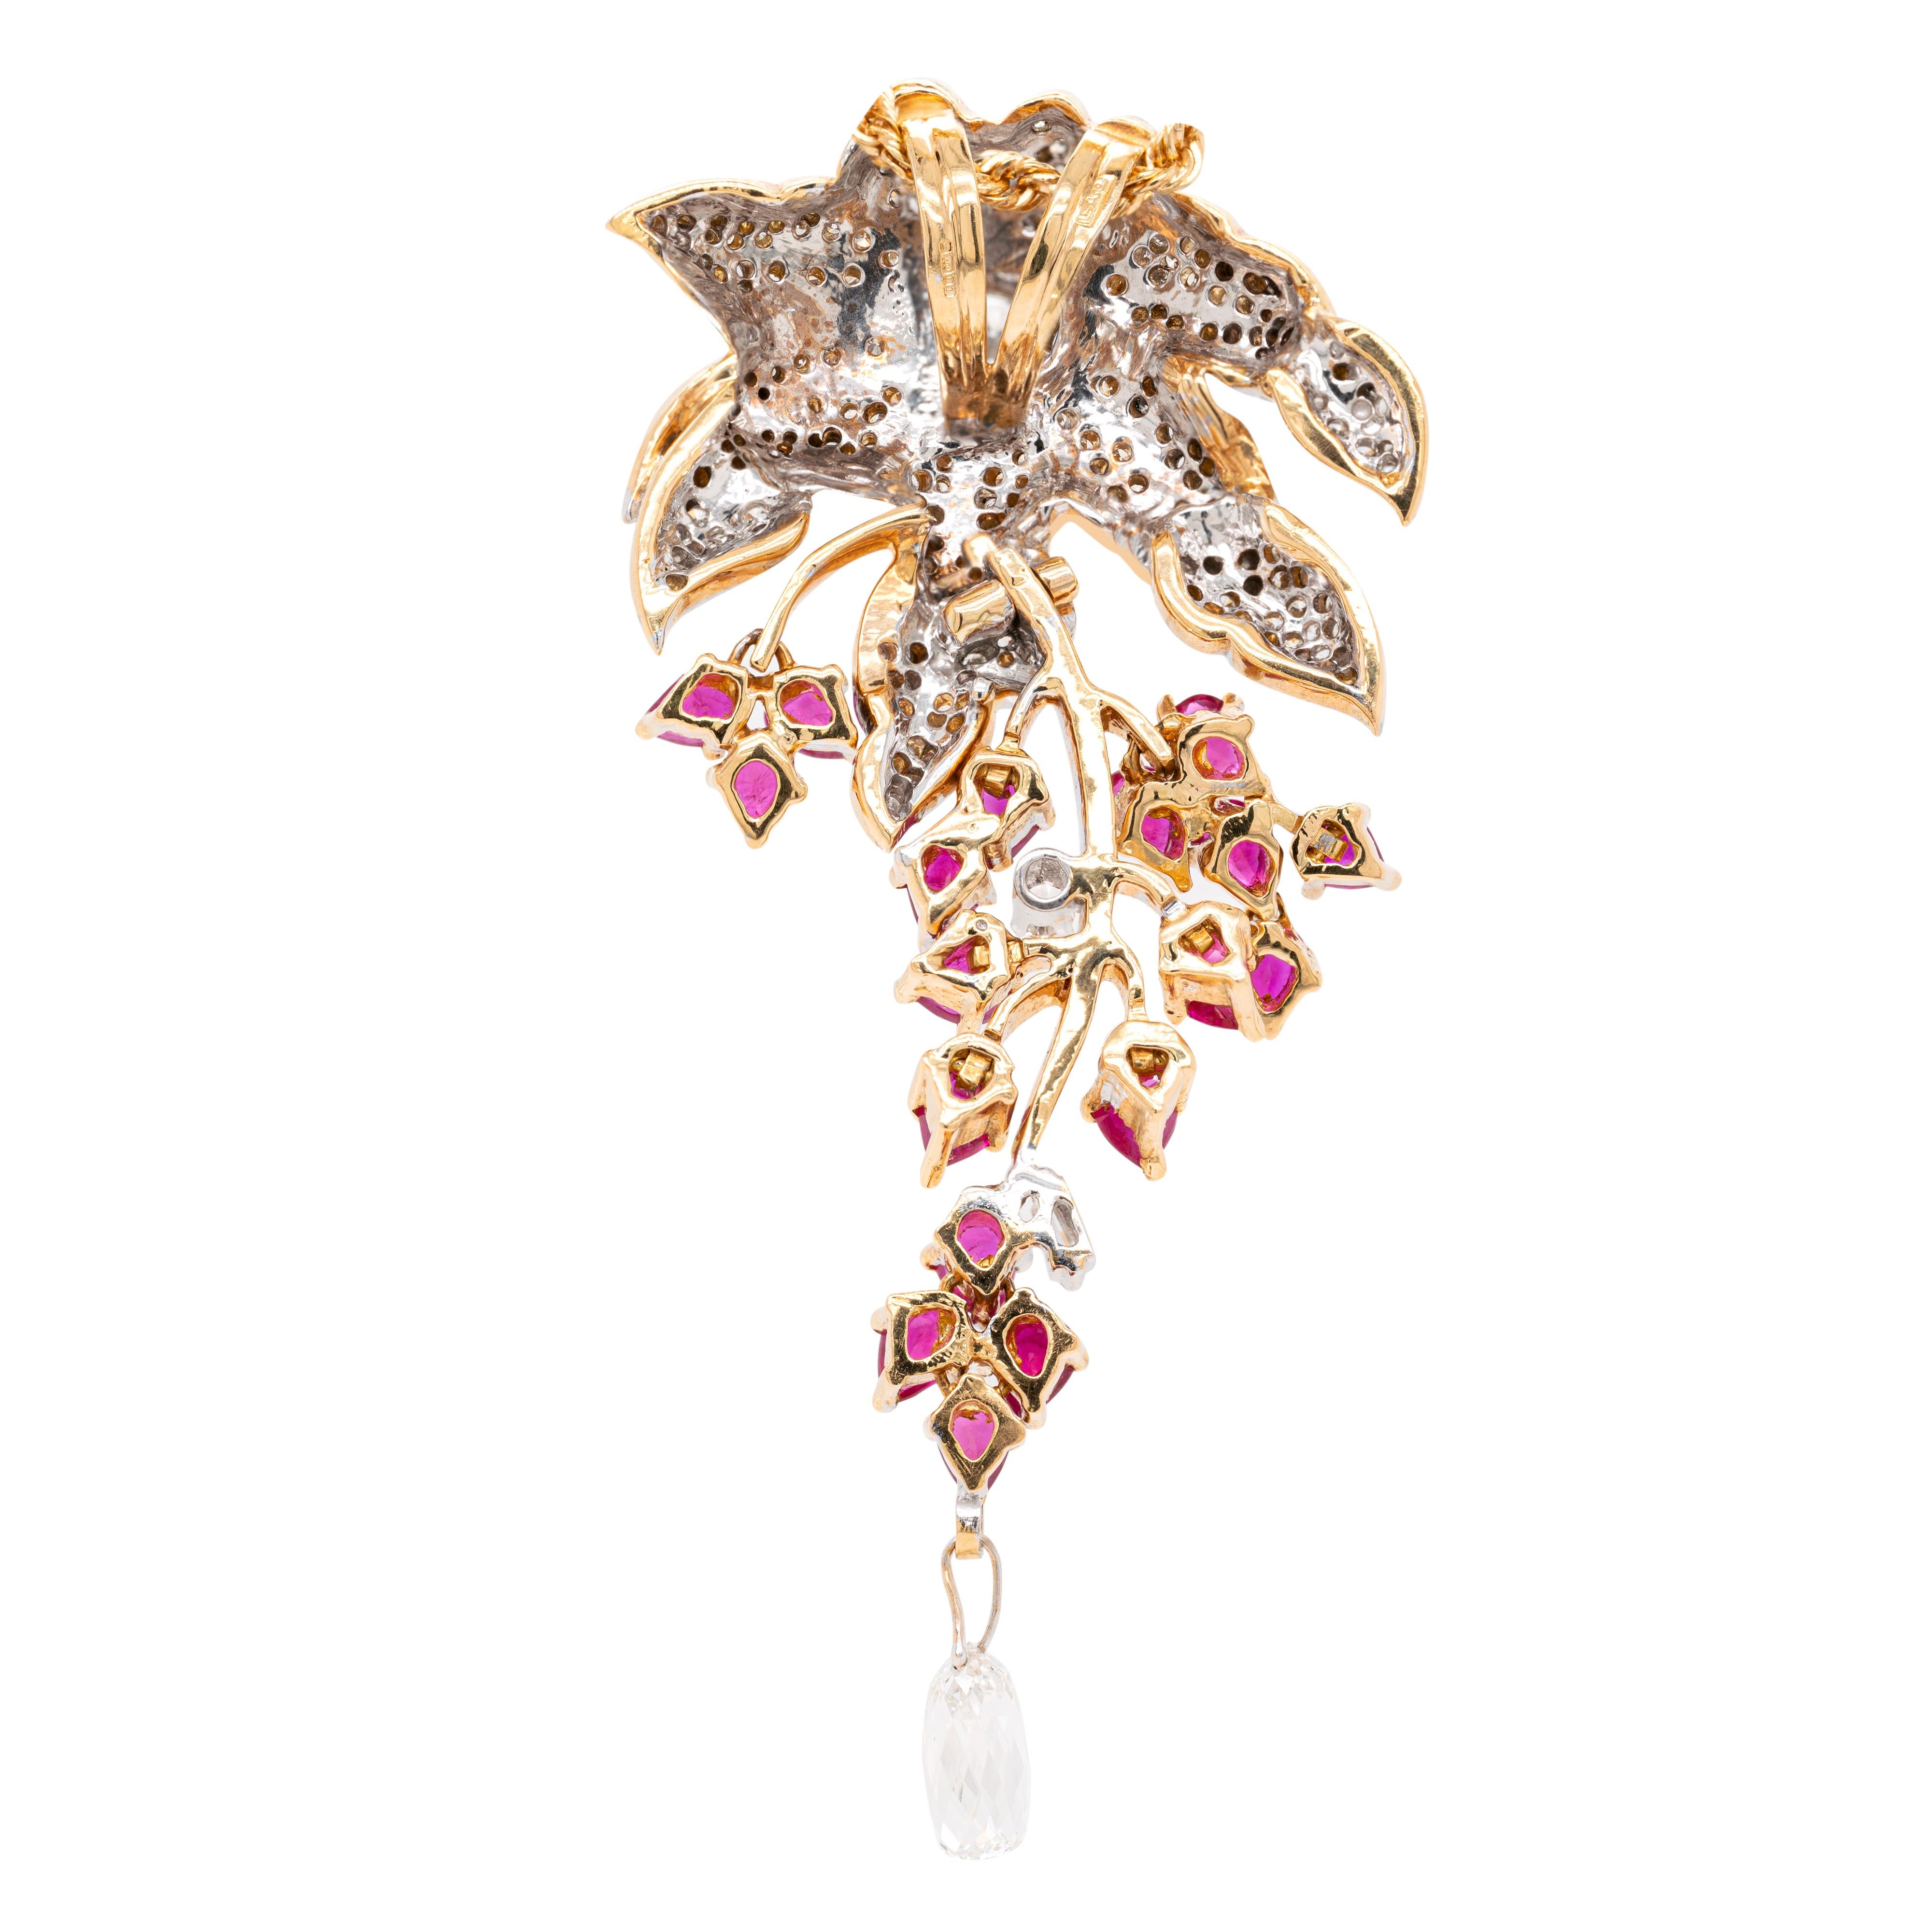 This sophisticated pendant features an intricate blooming floral motif crafted from 18 carat white and yellow gold. A lovely flower showcasing a diamond cluster in the centre and petals inlaid with pavé set round brilliant cut diamonds is the